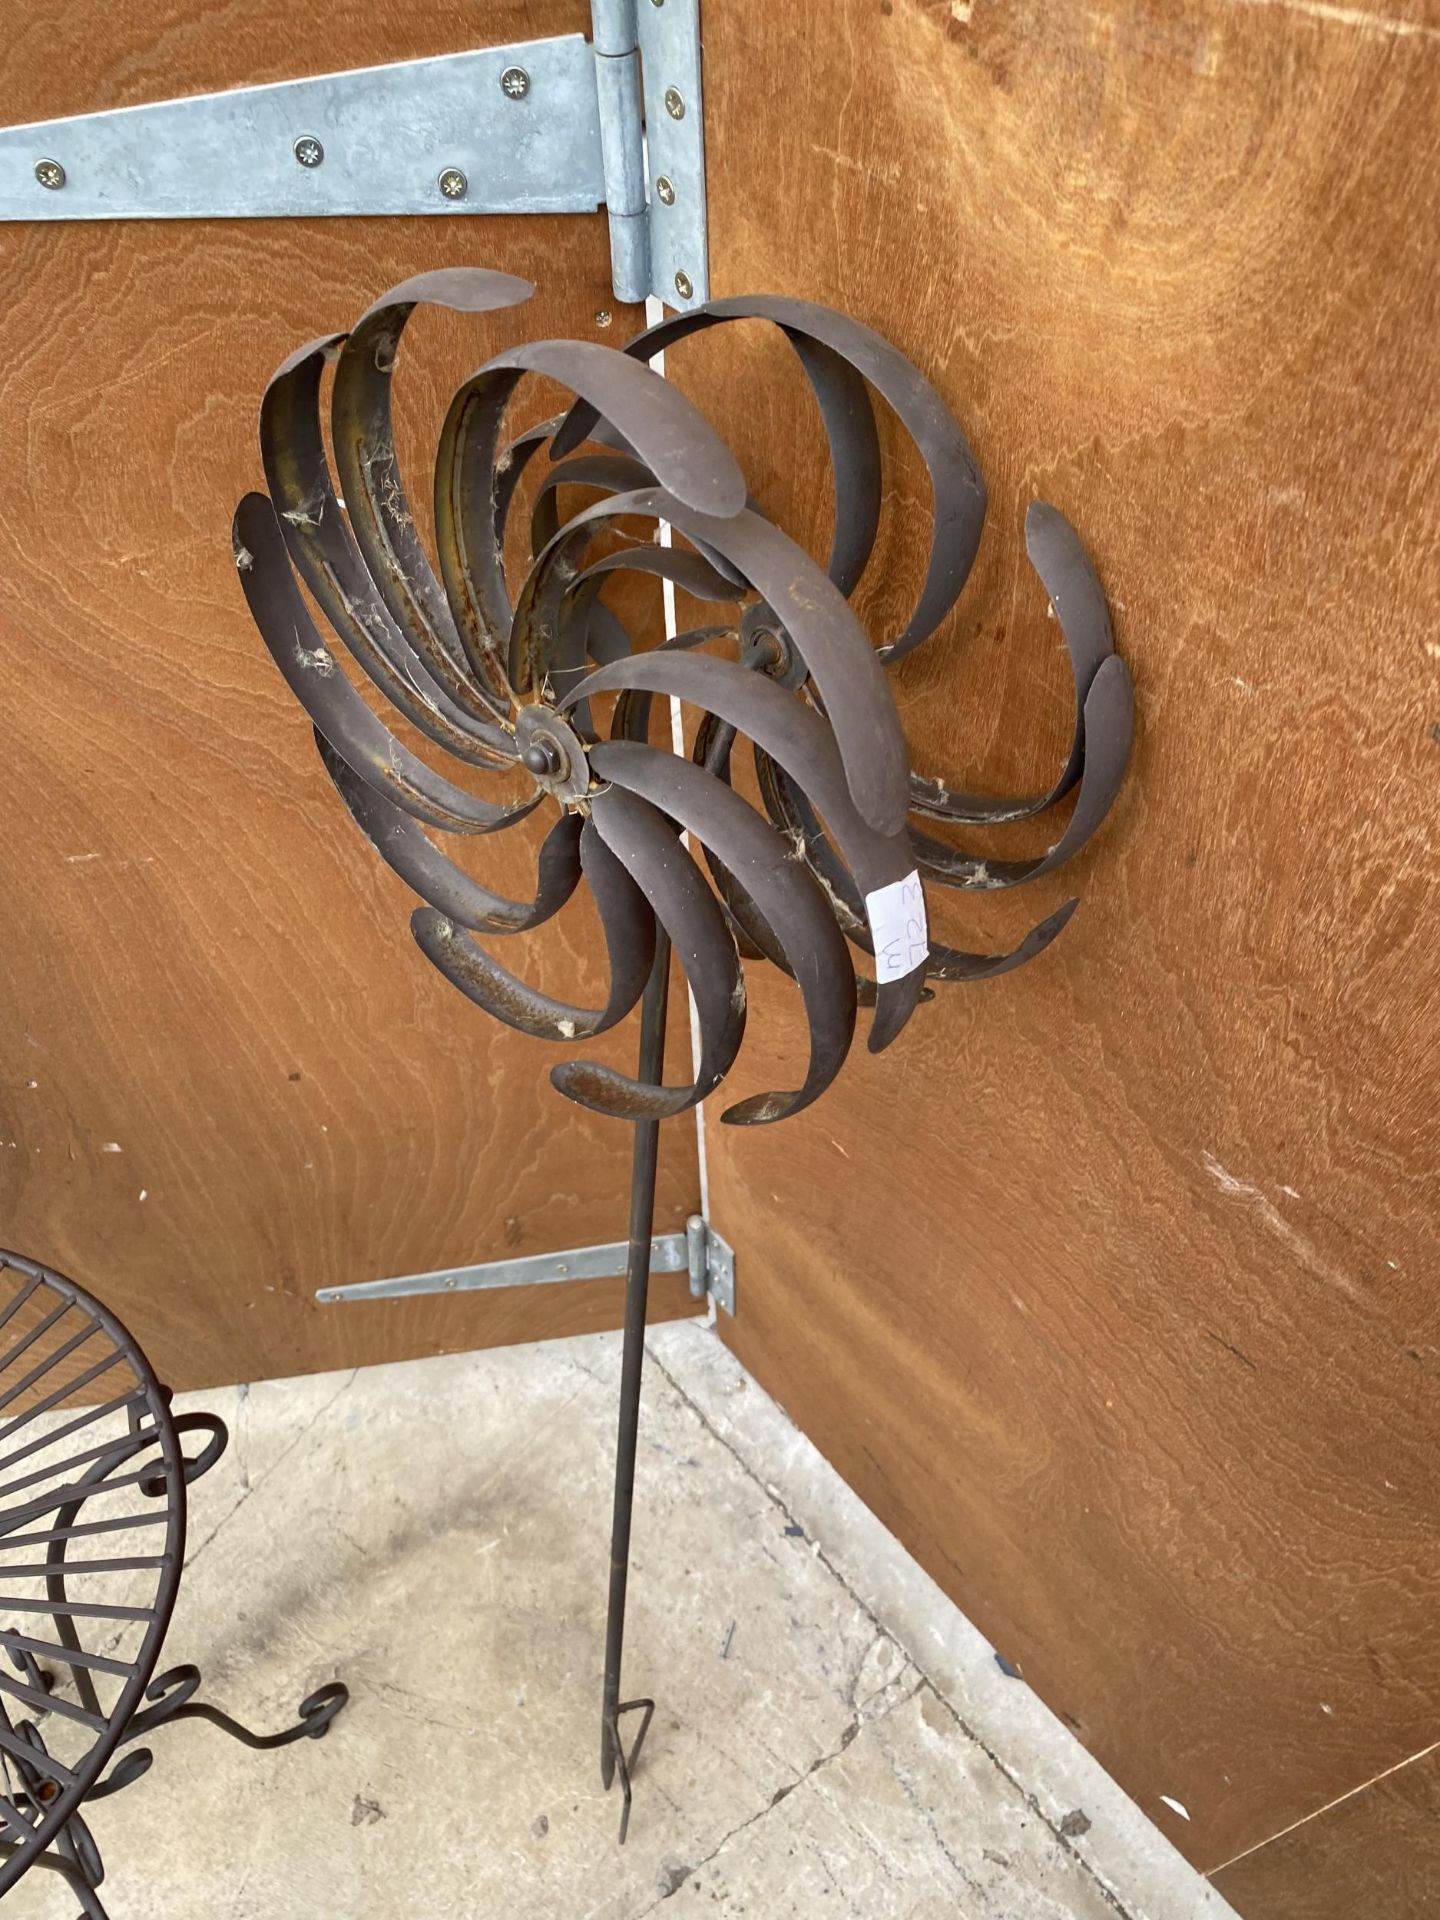 A SMALL DECORATIVE METAL SIDE TABLE AND A METAL WIND SPINNER - Image 3 of 5